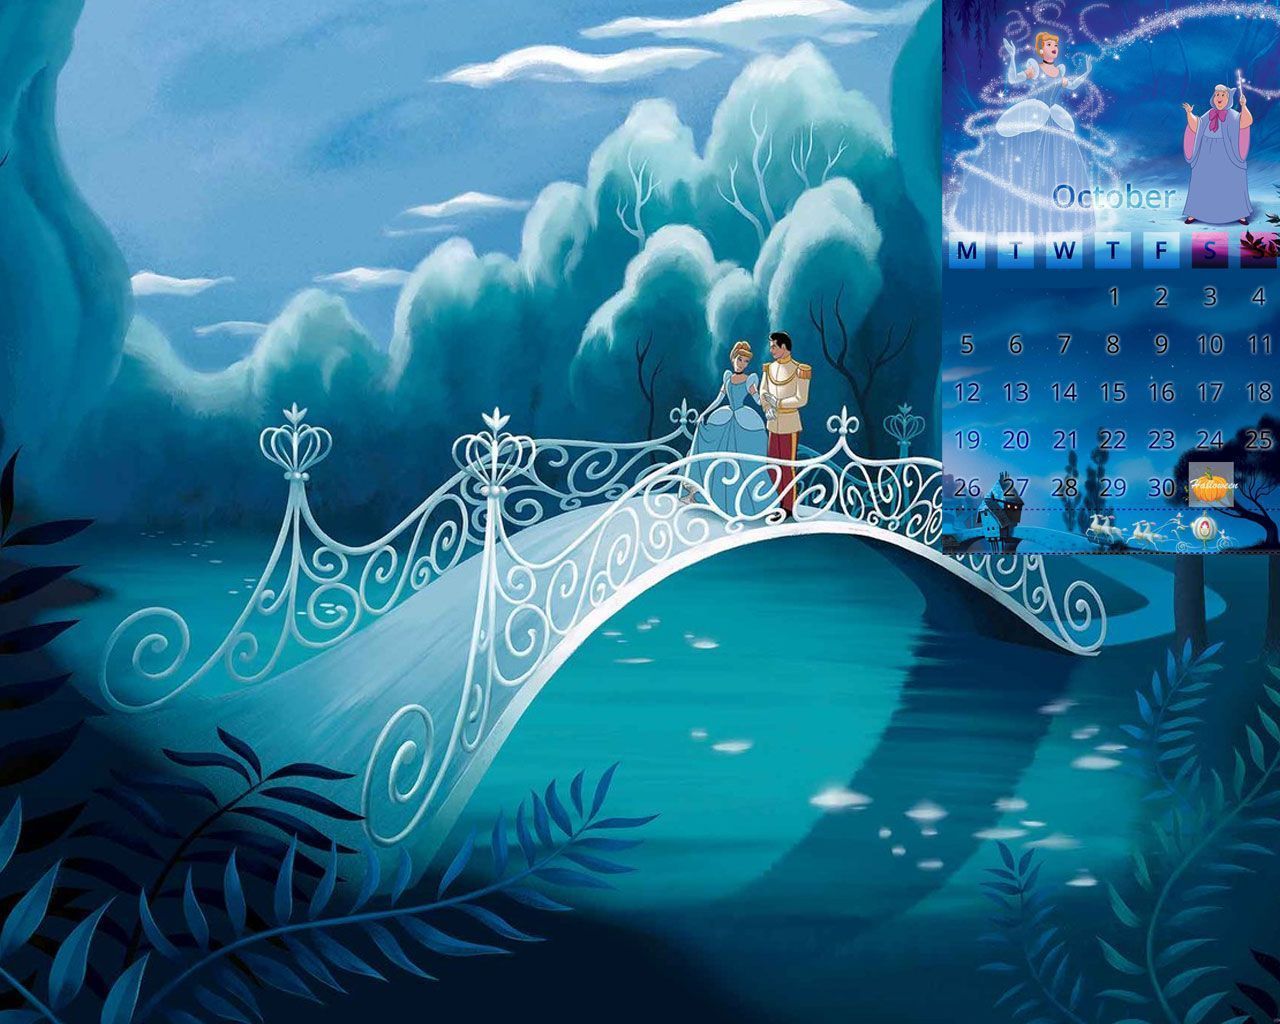 A beautiful scene from the movie Cinderella, with the main characters standing on a bridge. - 1280x1024